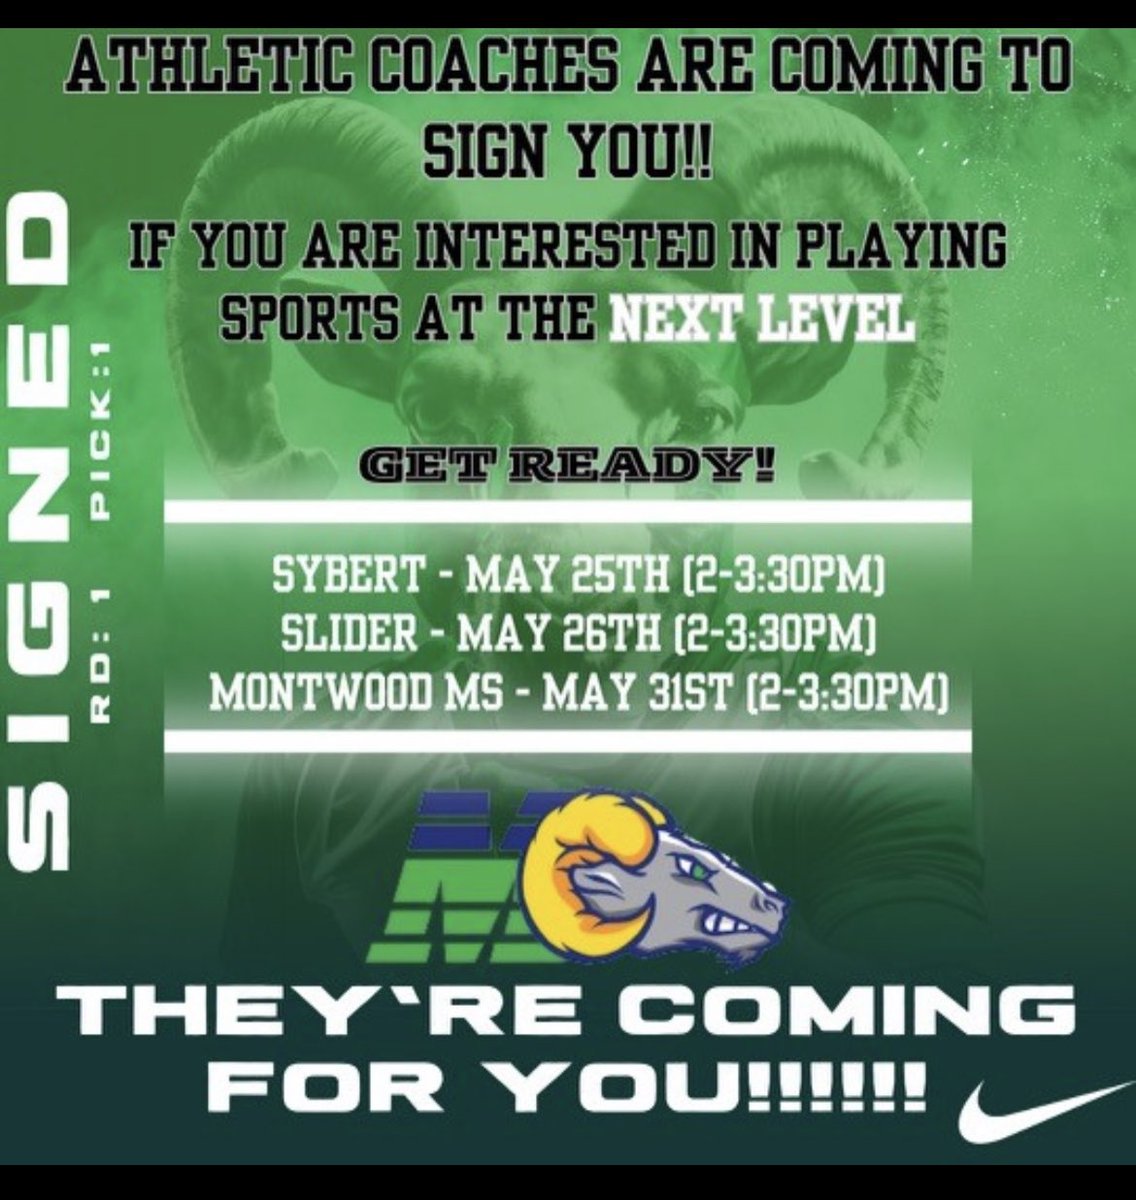 LET'S GO! Scorpions, Stallions, and Mooses we are coming for you to unit as one and dominate!!! Come talk and sign up with us • WE ARE ONE! • #MHS #FutureRAMS #CrossCountry #Track @MontwoodHS @montwoodthrows @DPalacios_MMS @WDSlider_MS